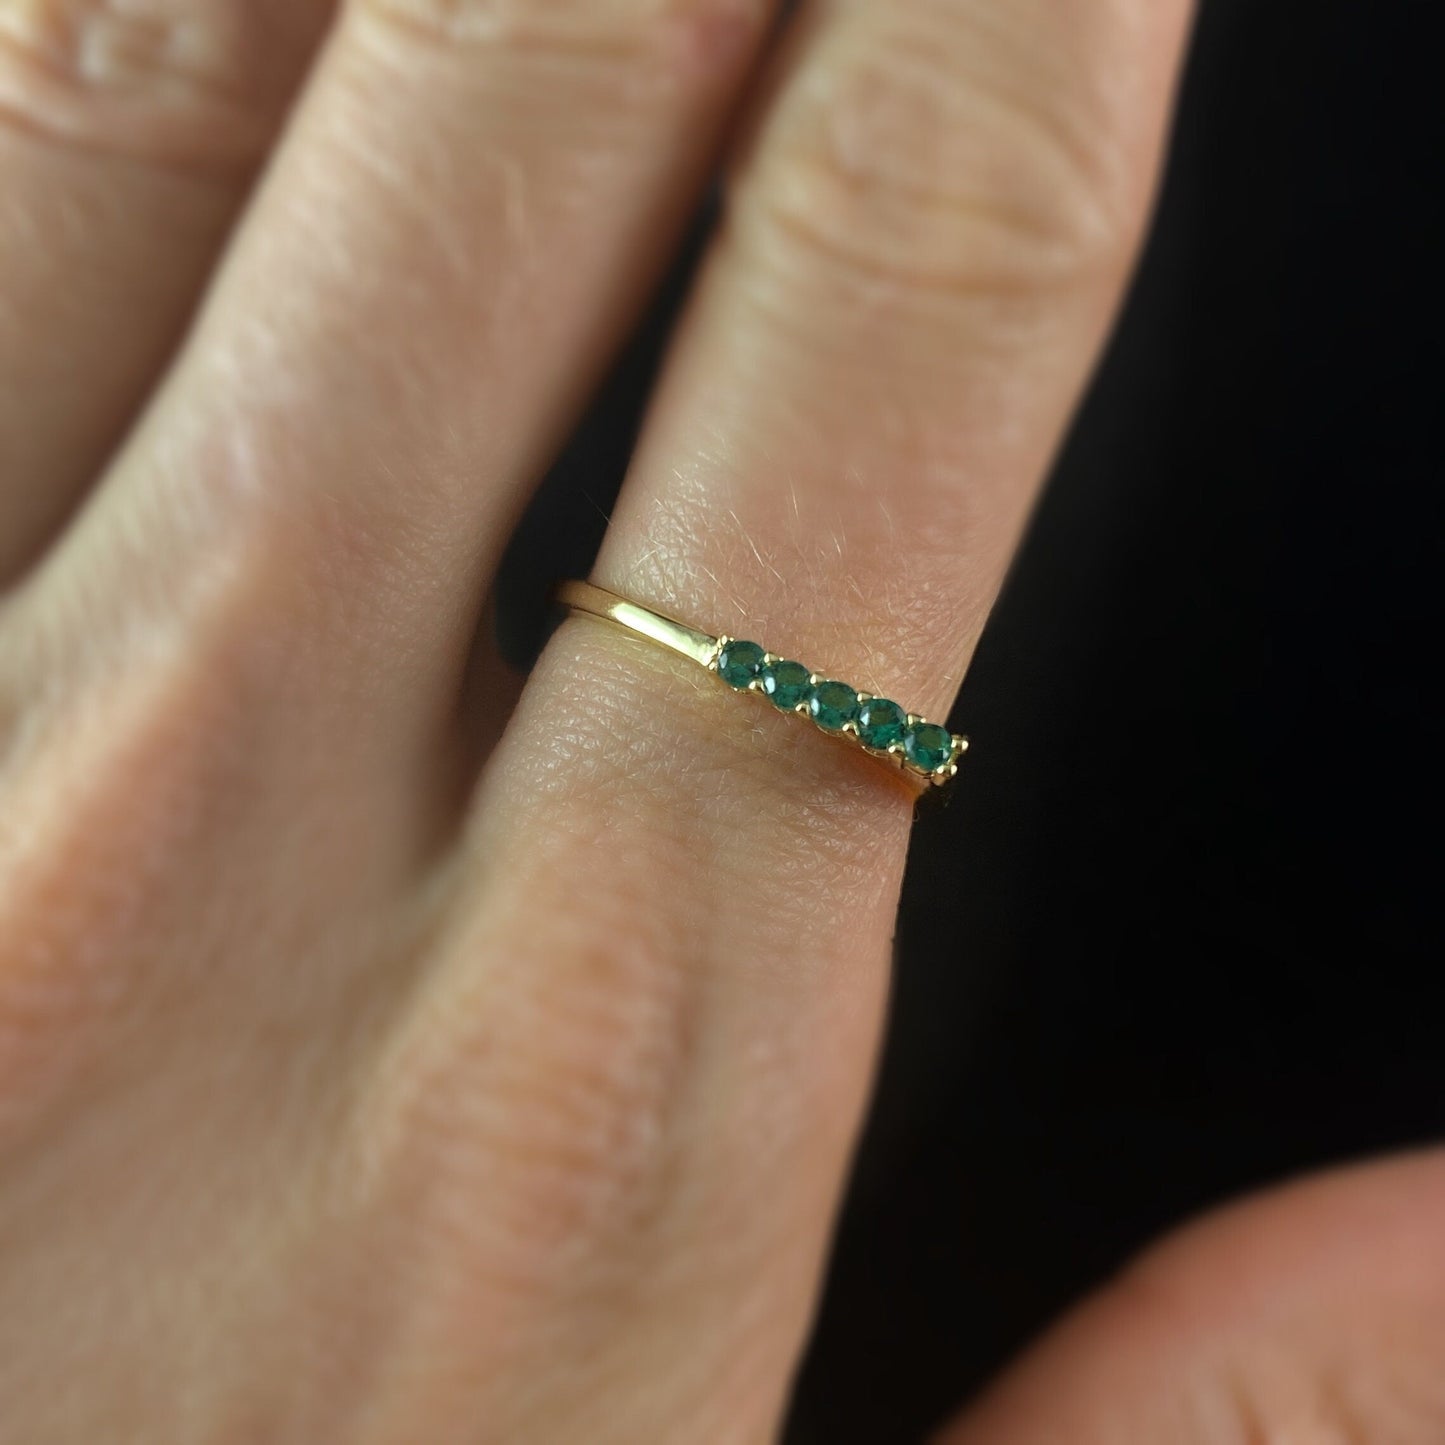 Elegant Gold Ring with Five Dainty Green Crystals - Size 7, Genevive